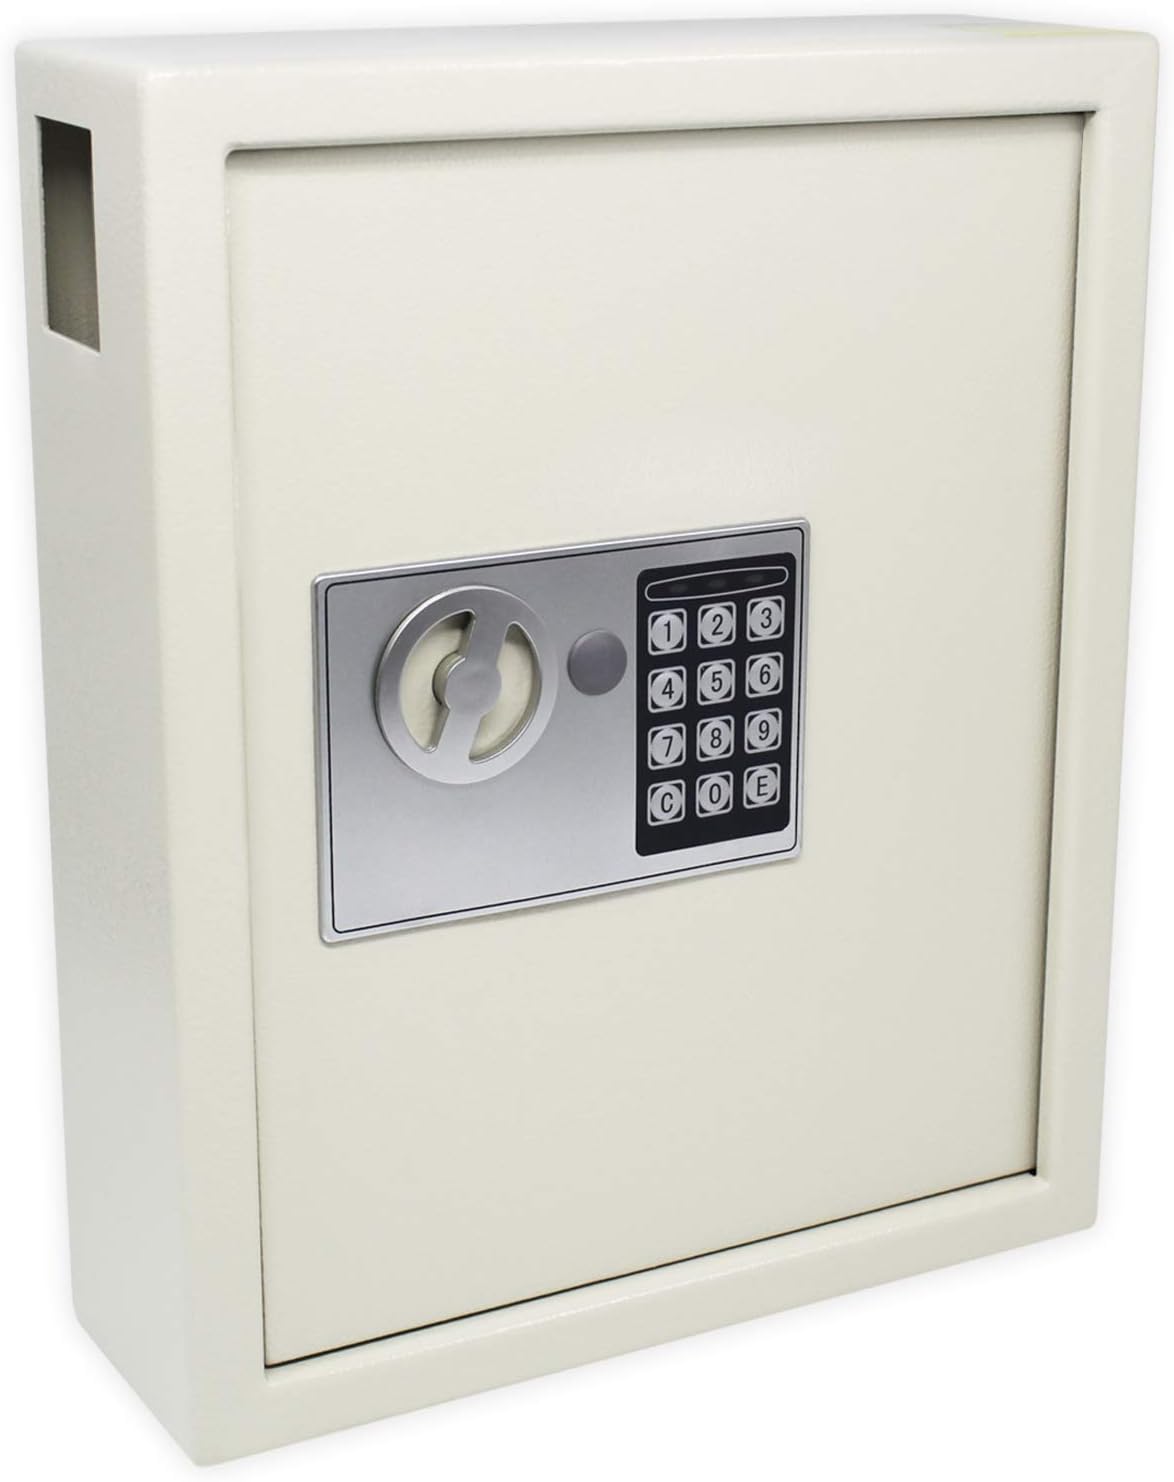 Image of a safe or lock box